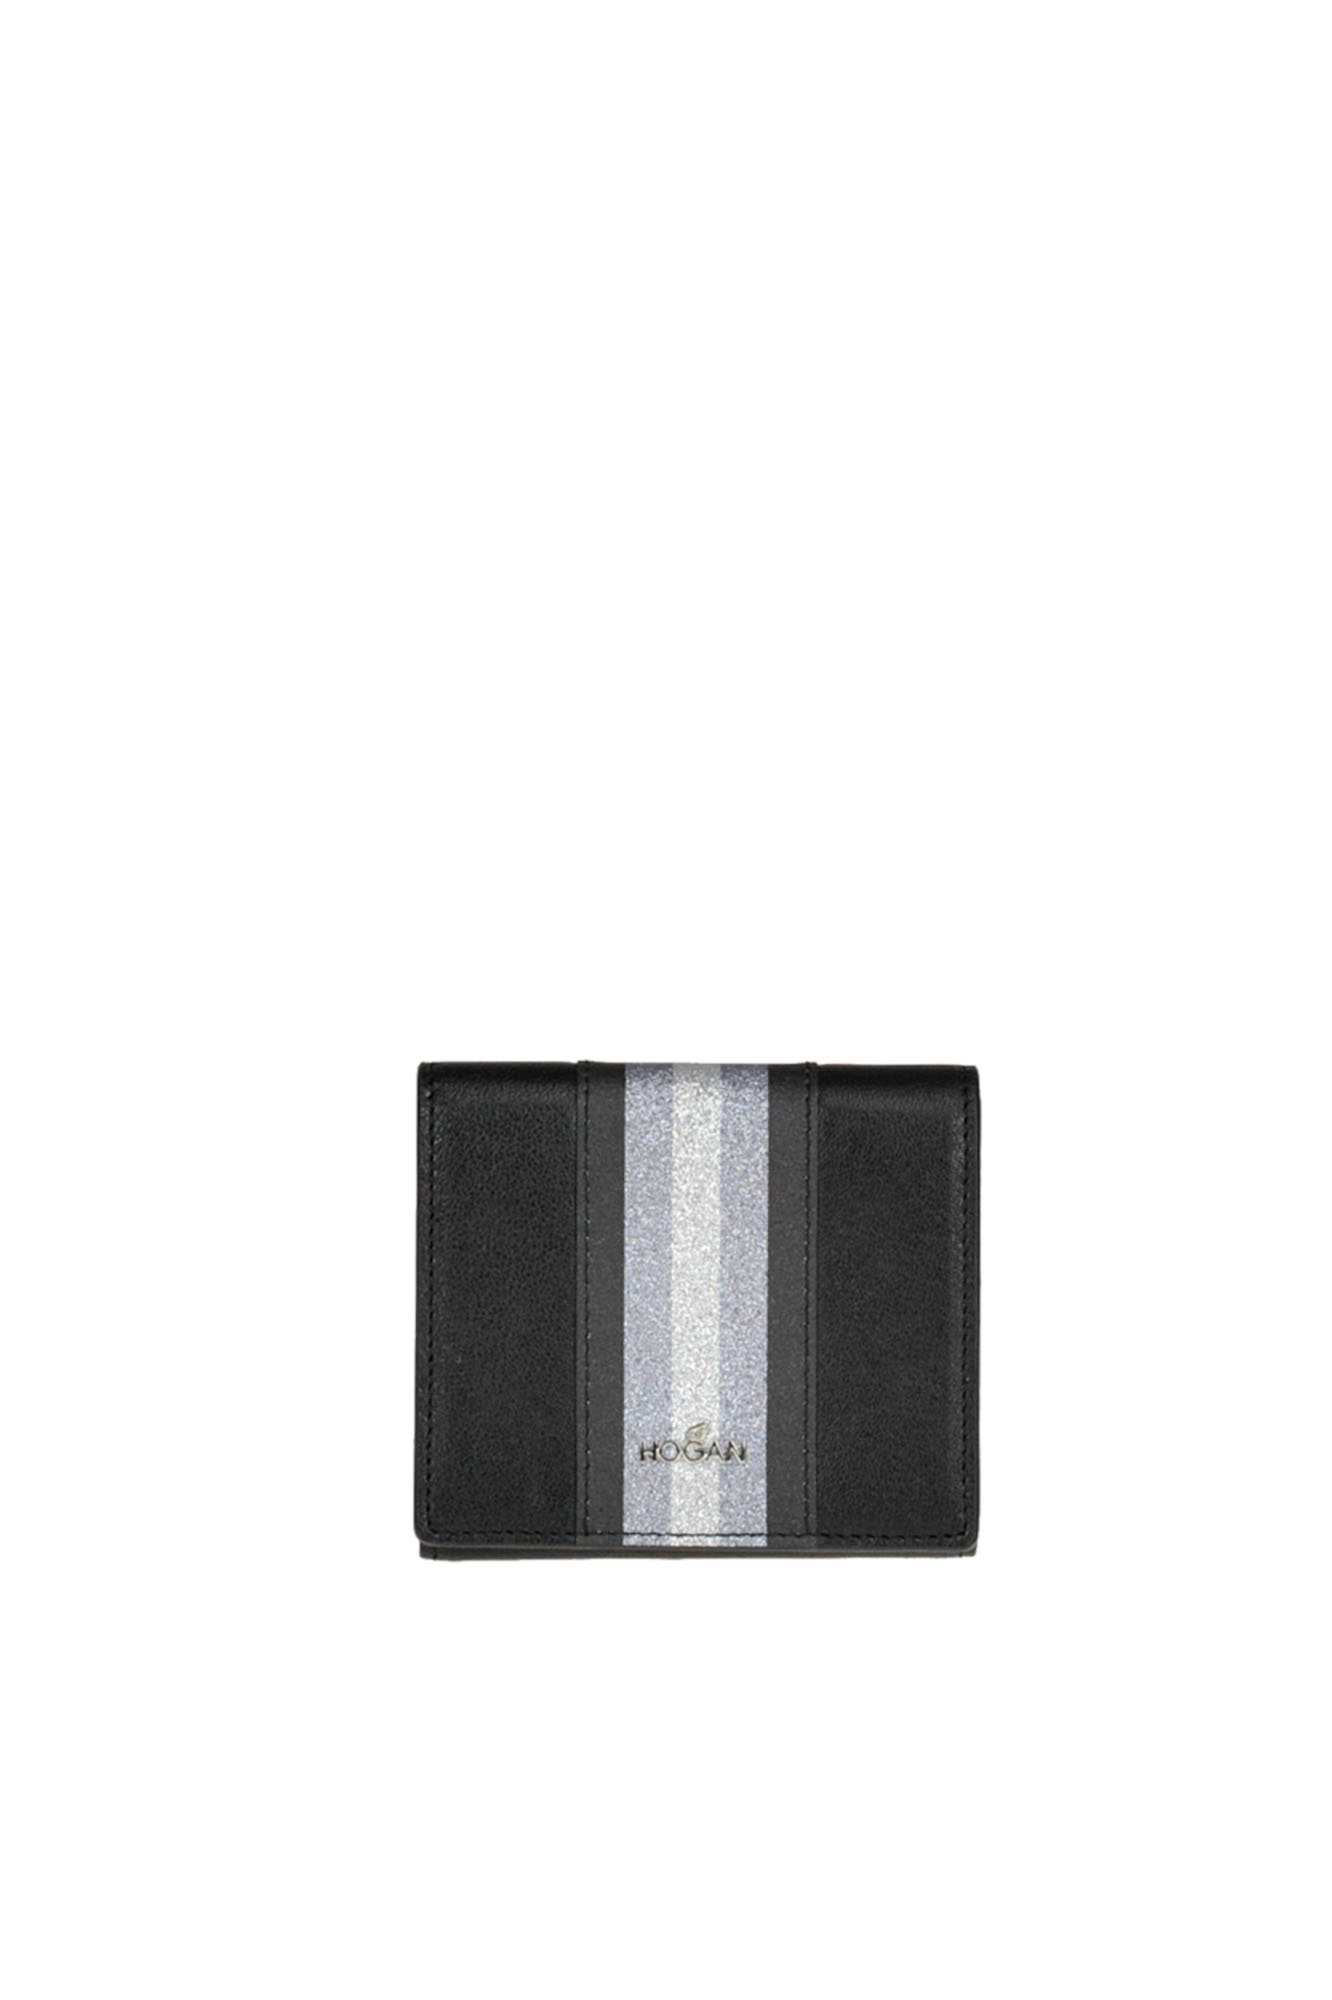 HOGAN COMPACT LEATHER WALLET